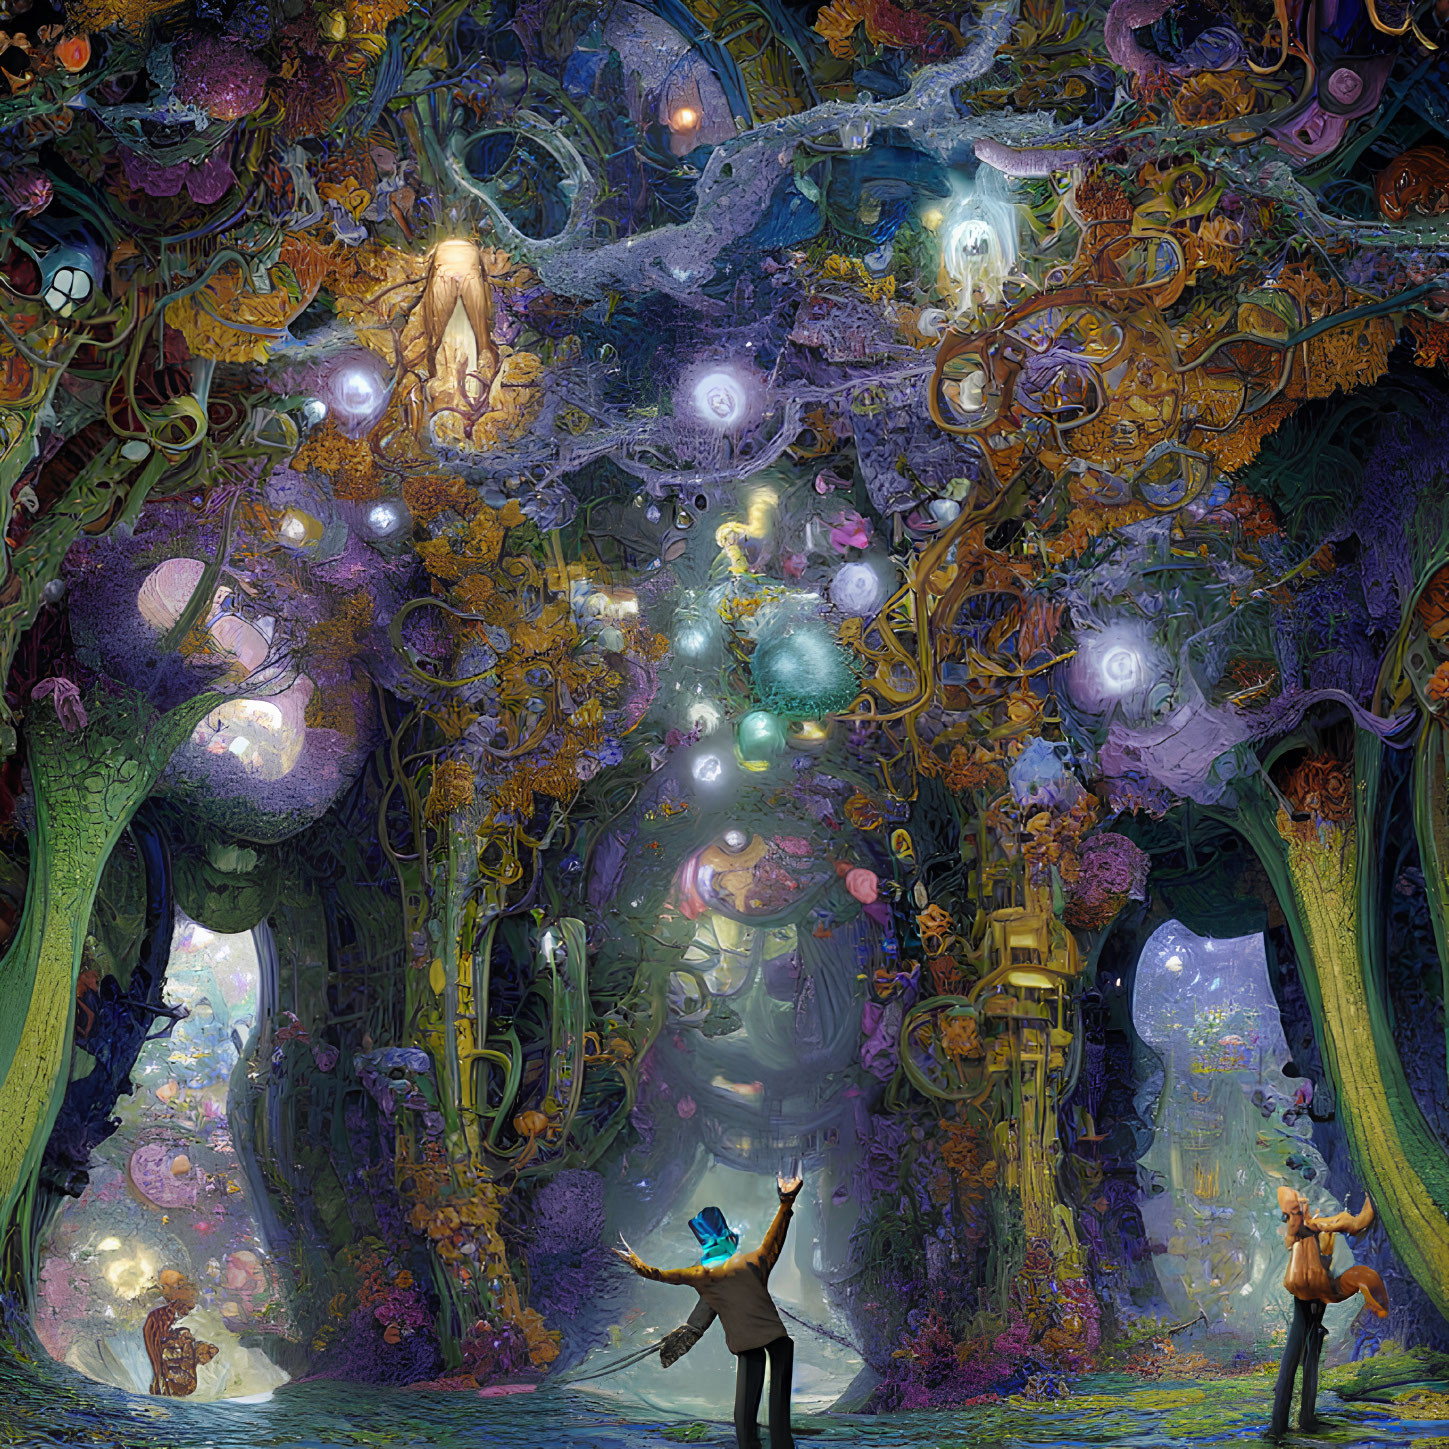 Enchanting forest scene with glowing orbs and ethereal creatures